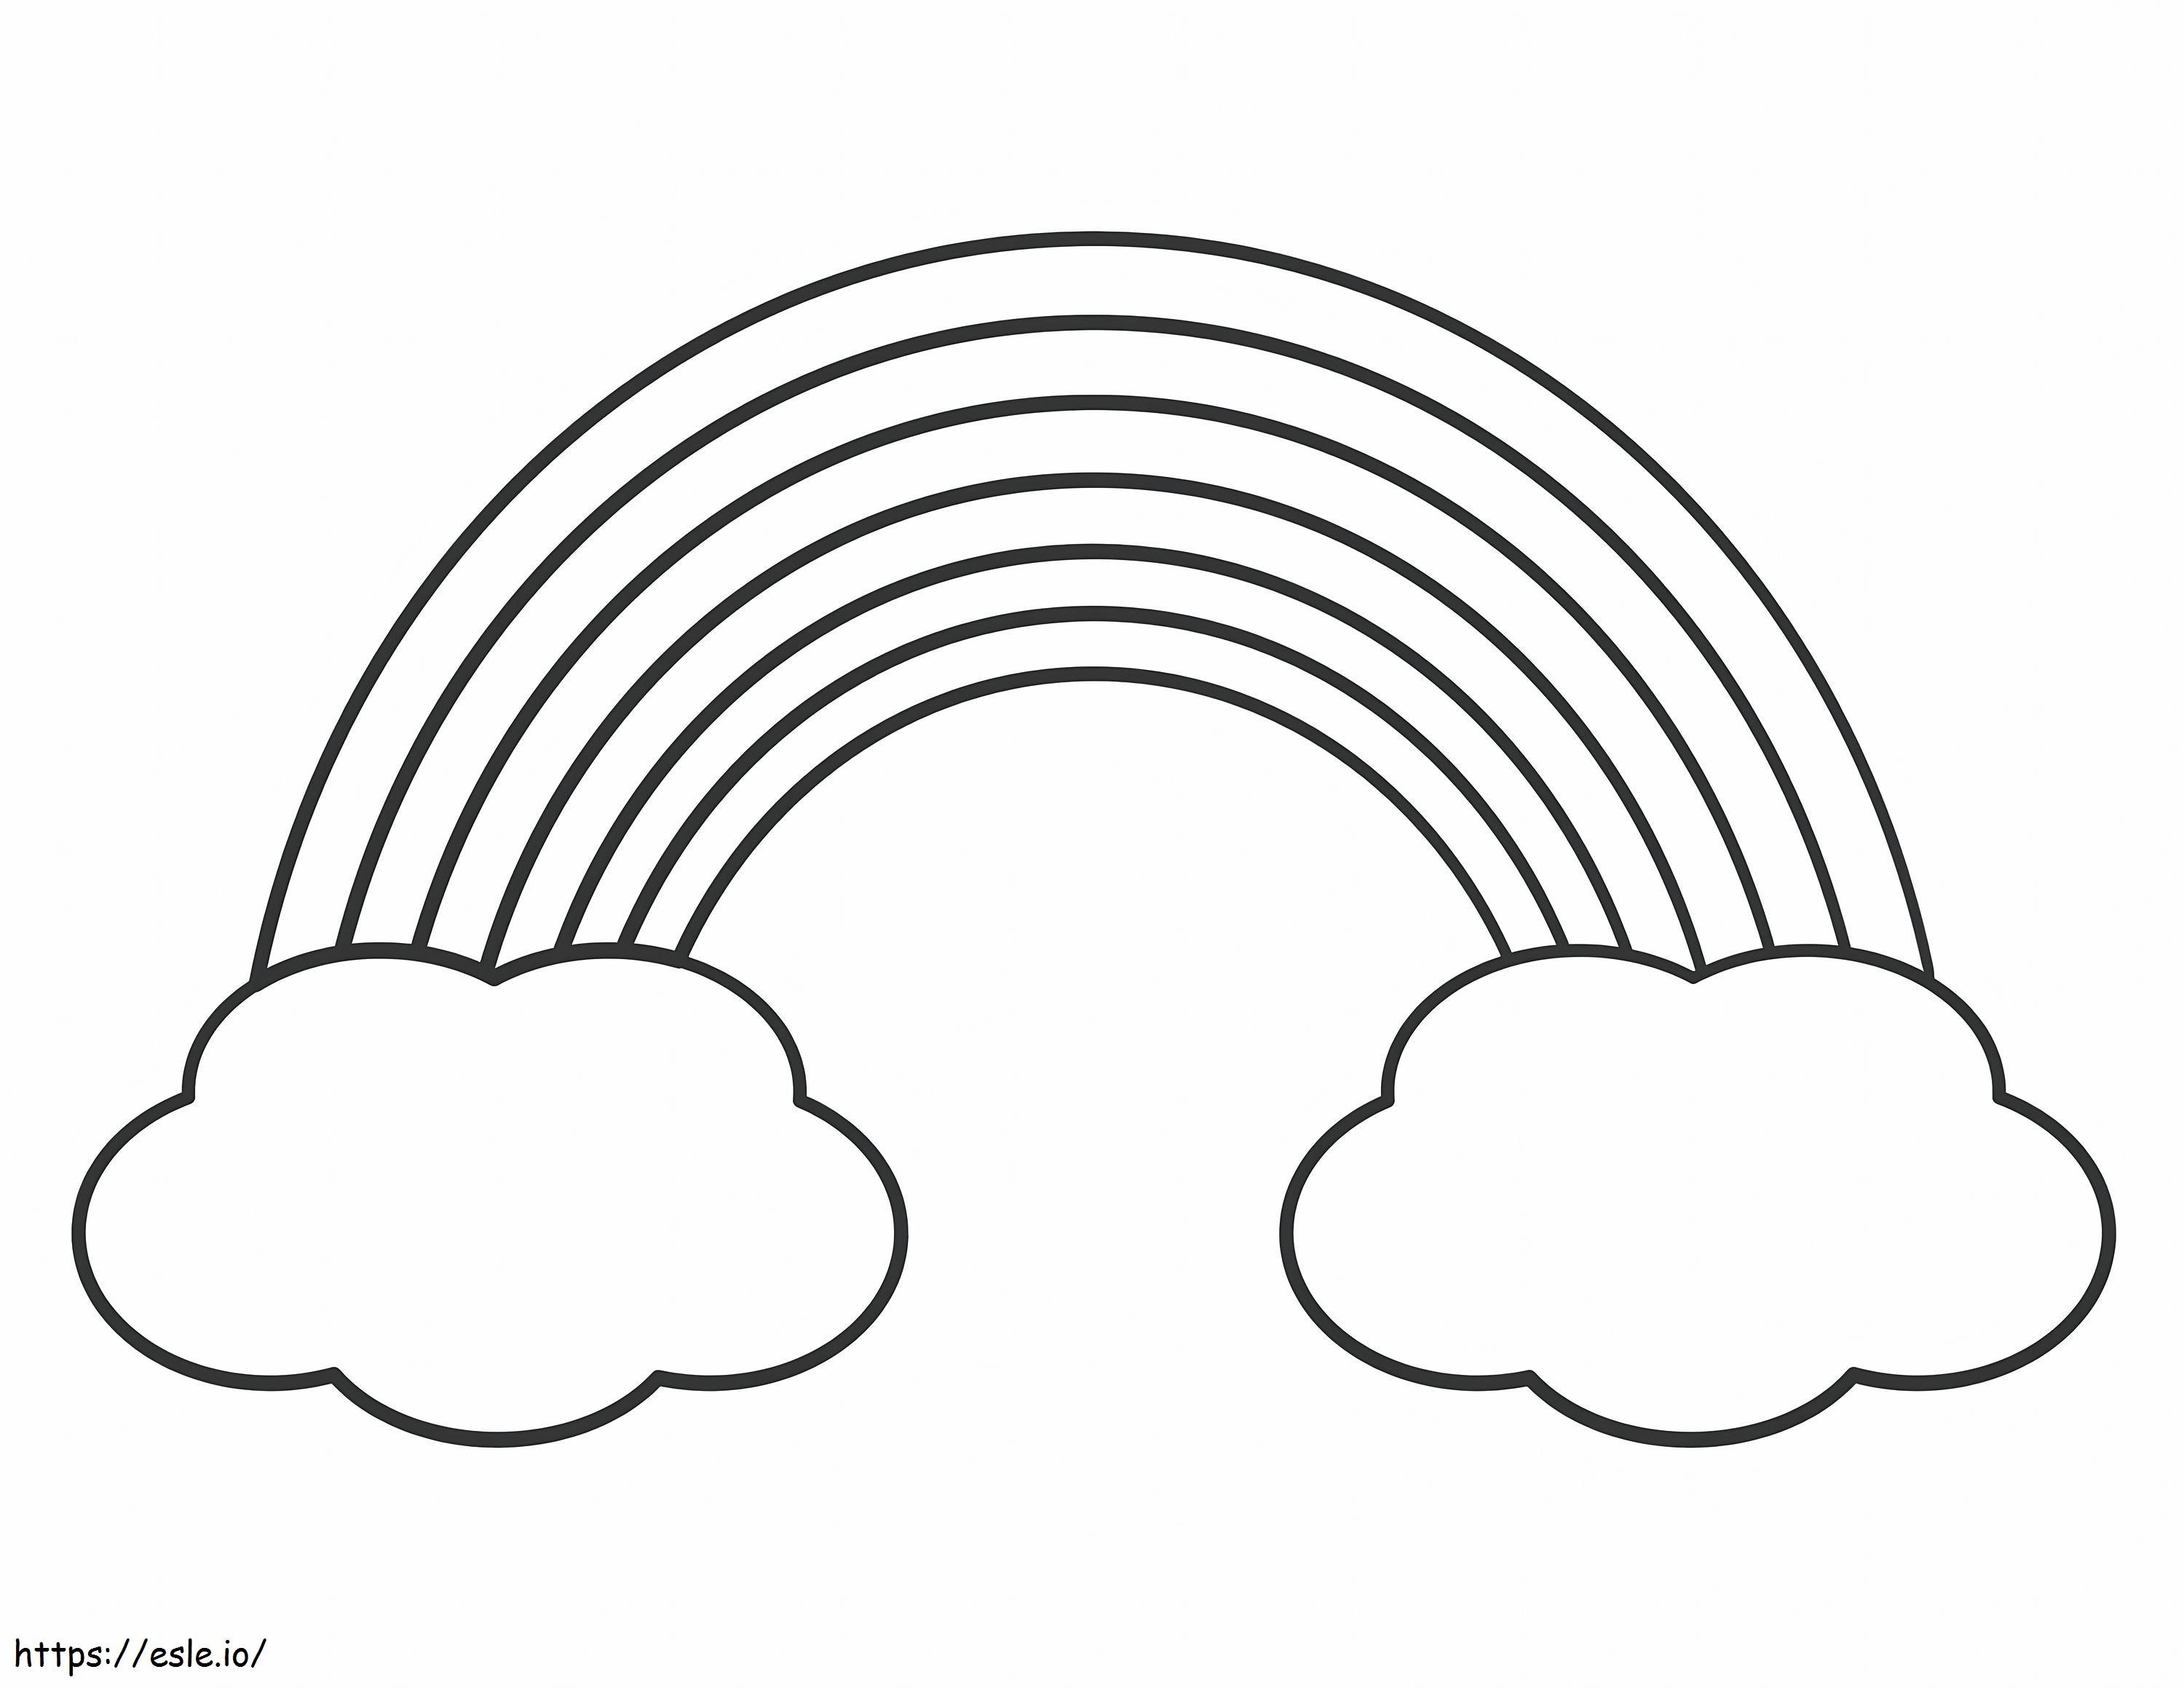 Basic Rainbow coloring page